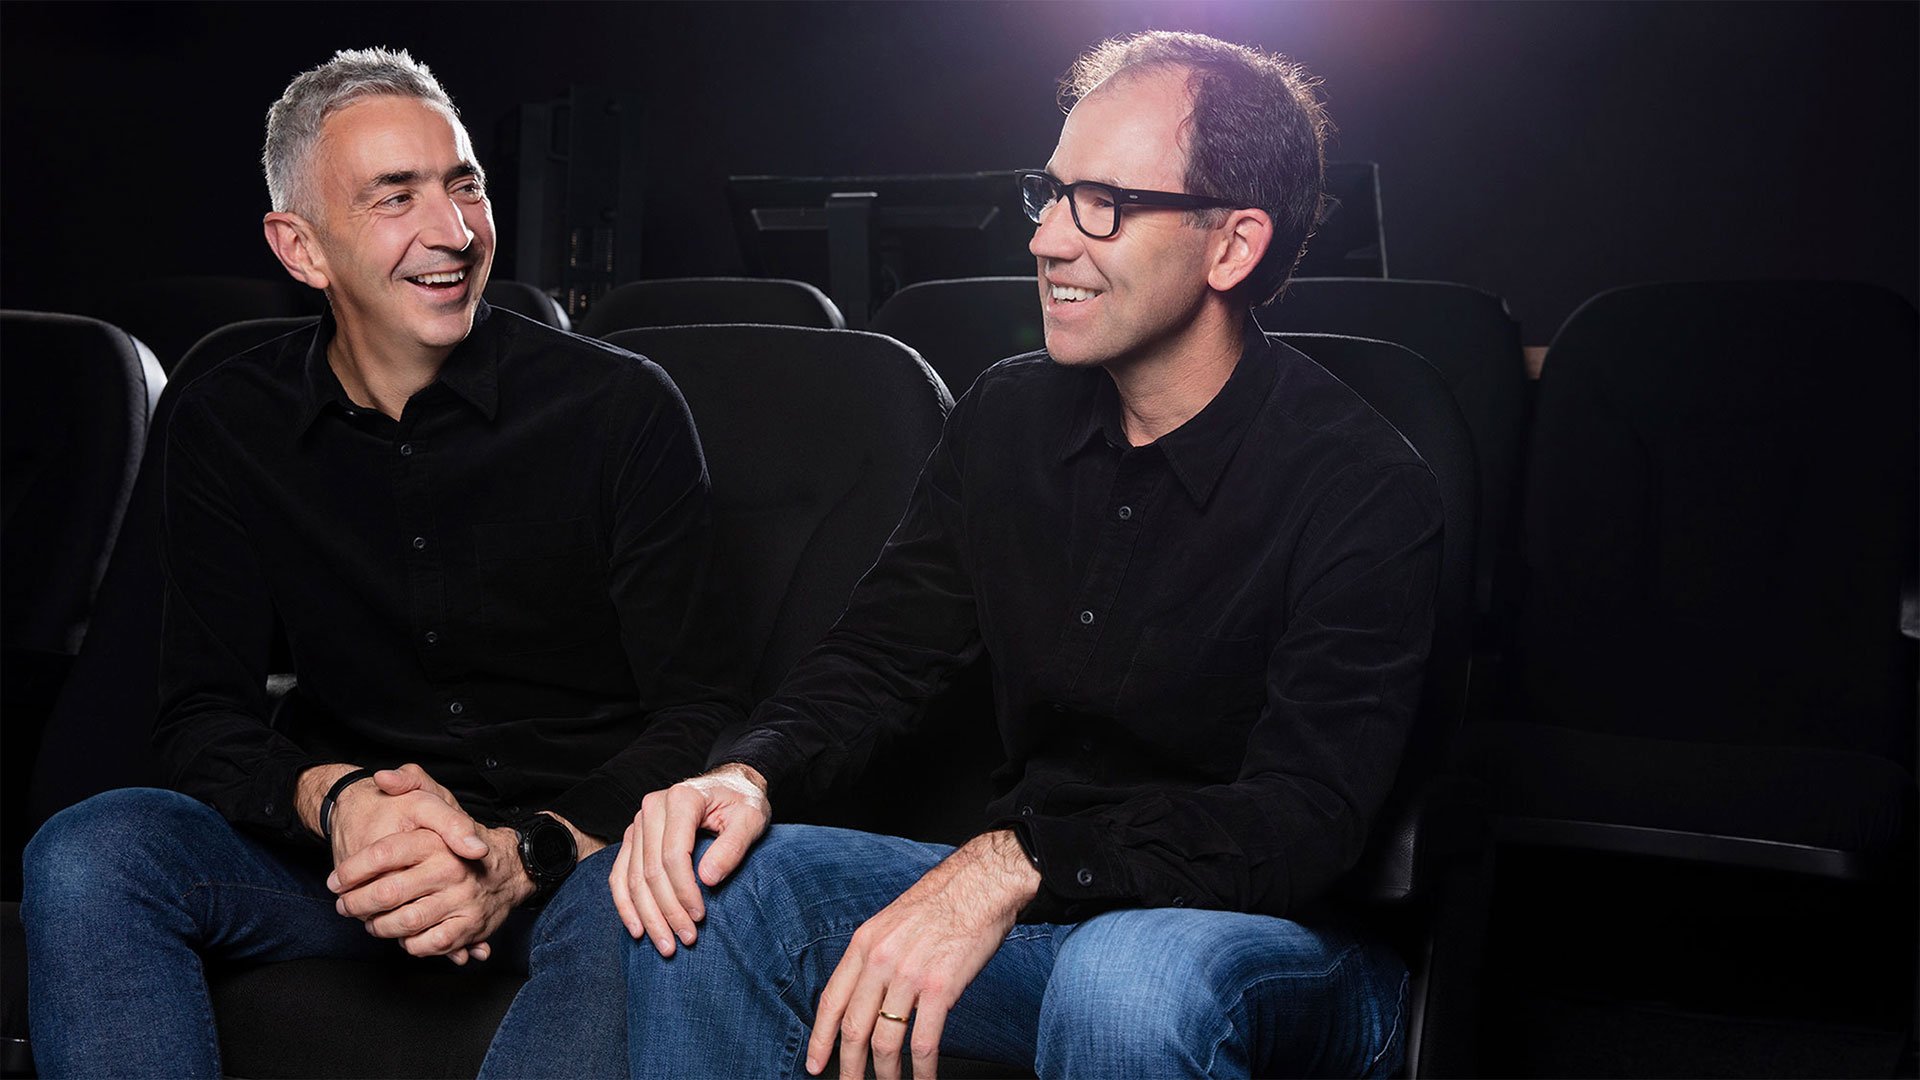 Marc Dando, Chief Design Officer, X2X (left), and Eric Dachs, CEO, X2X.